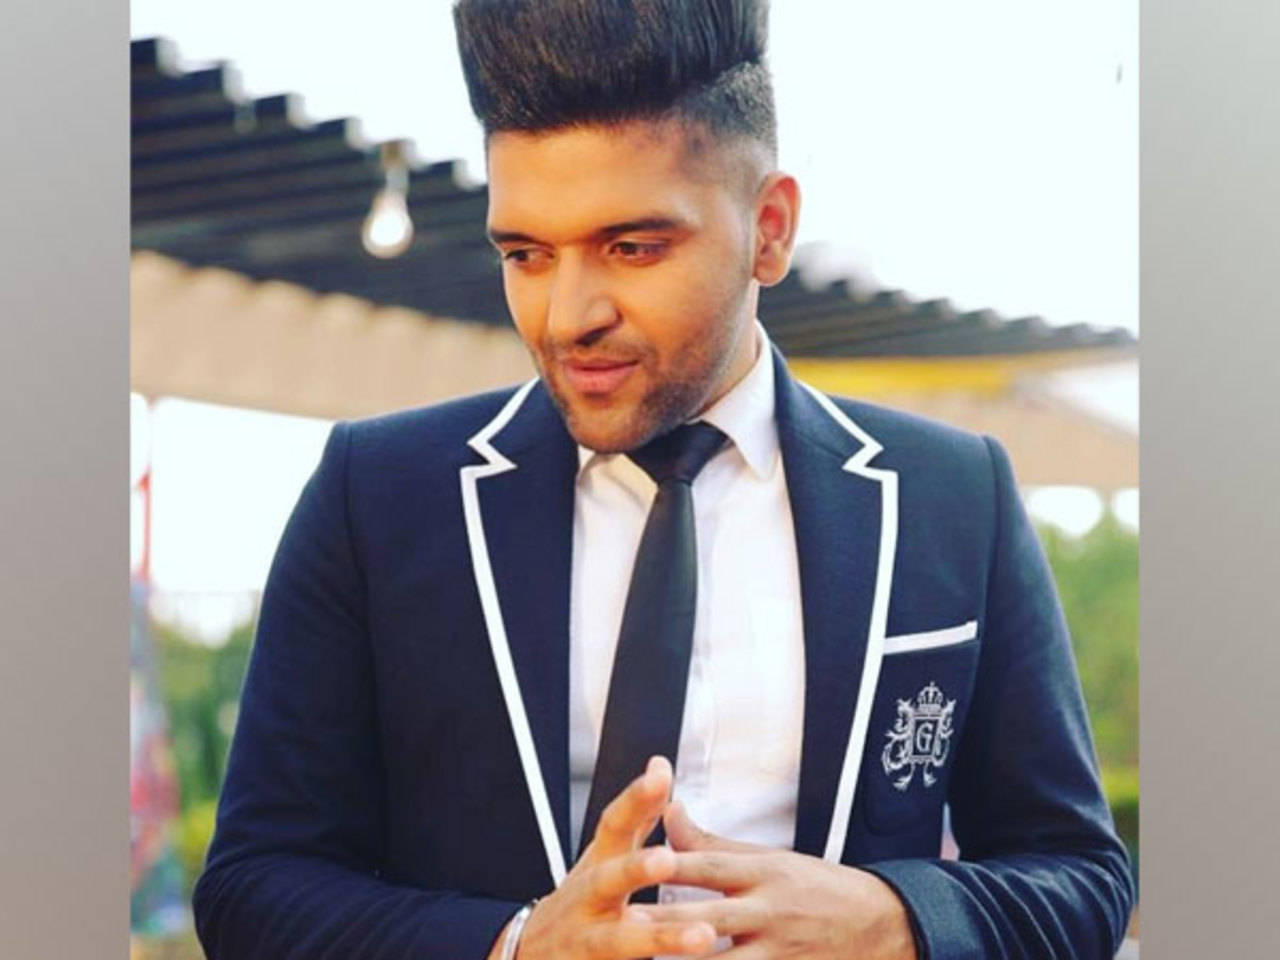 Guru Randhawa Hairstyle & Haircut (MUST WATCH) | hair cut style of boys |  Real-Time YouTube Video View Count | SocialCounts.org